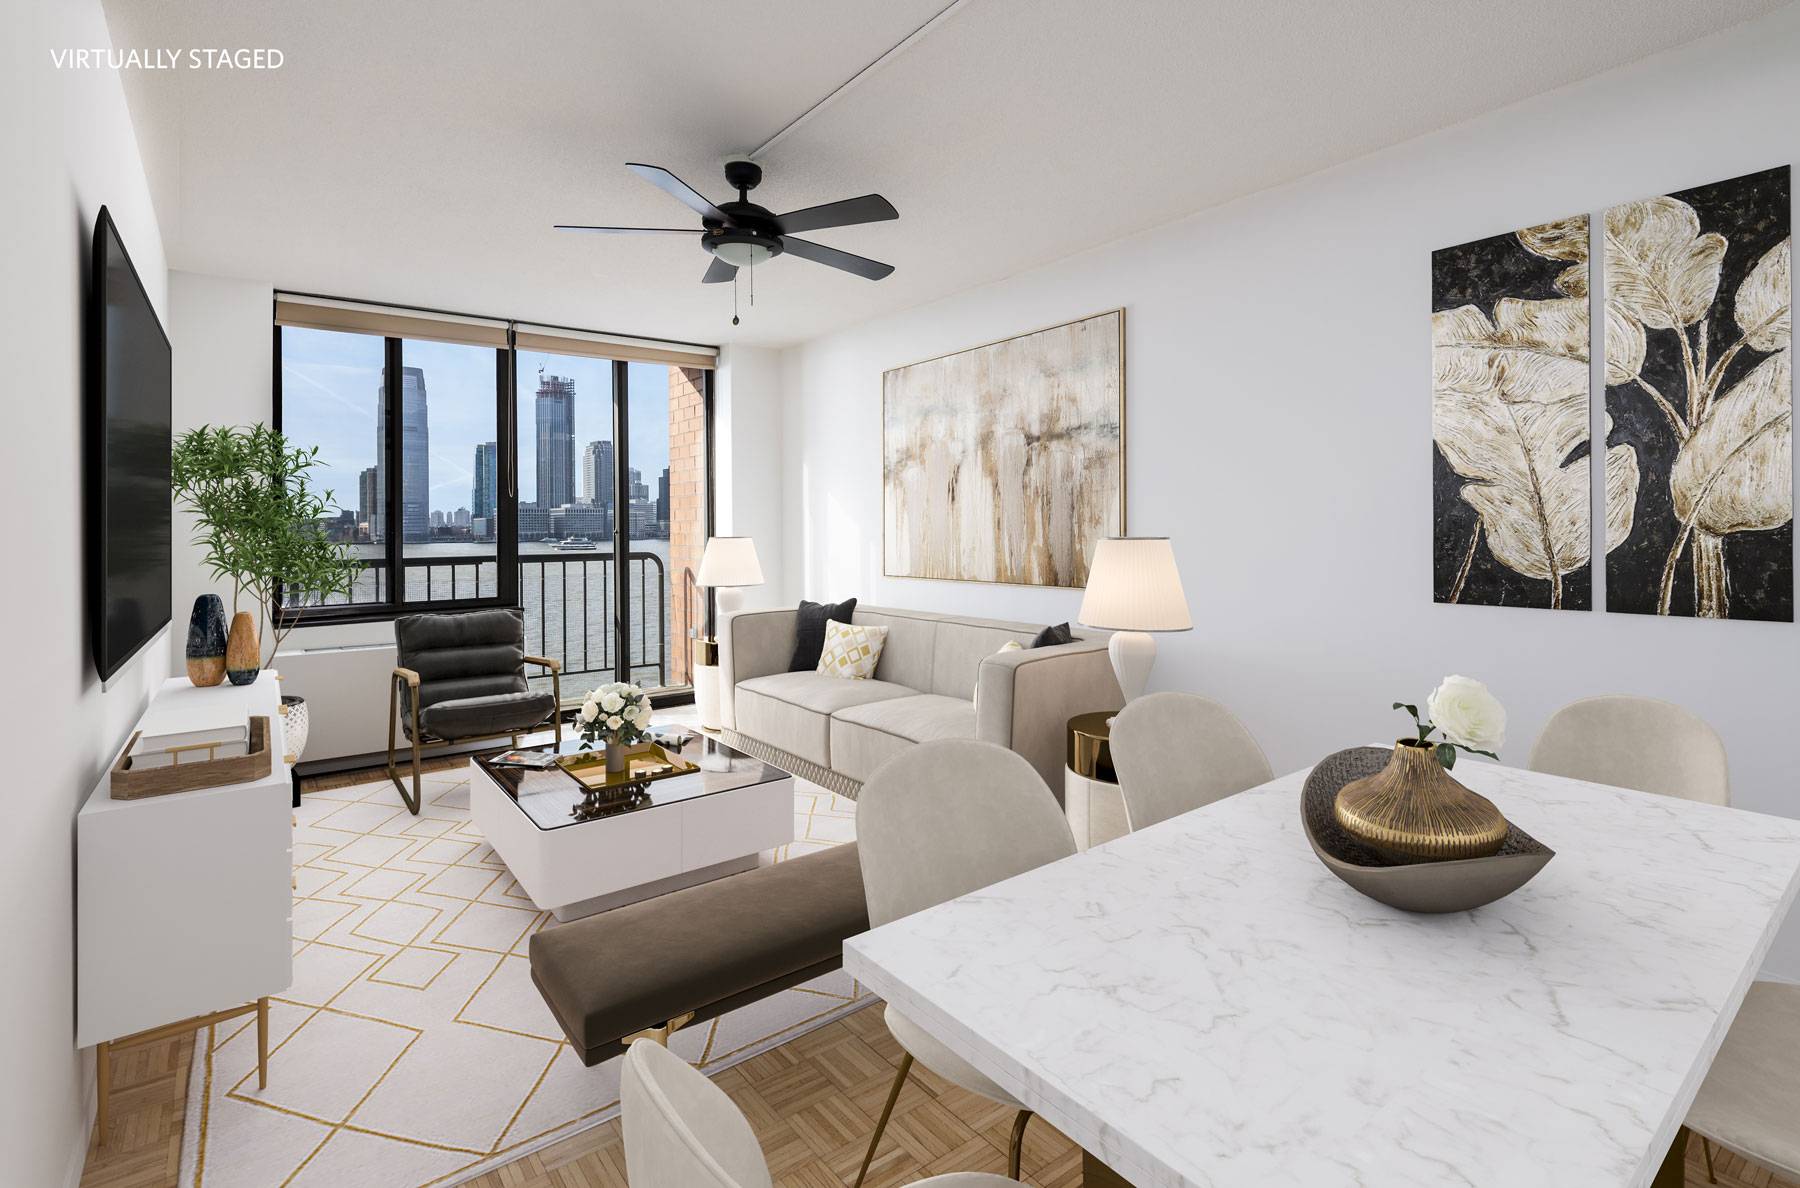 5N At Liberty Terrace is an exceptional, sunny 1 bedroom in a full service condominium with unrivaled Hudson River views from this spacious and renovated West facing unit.